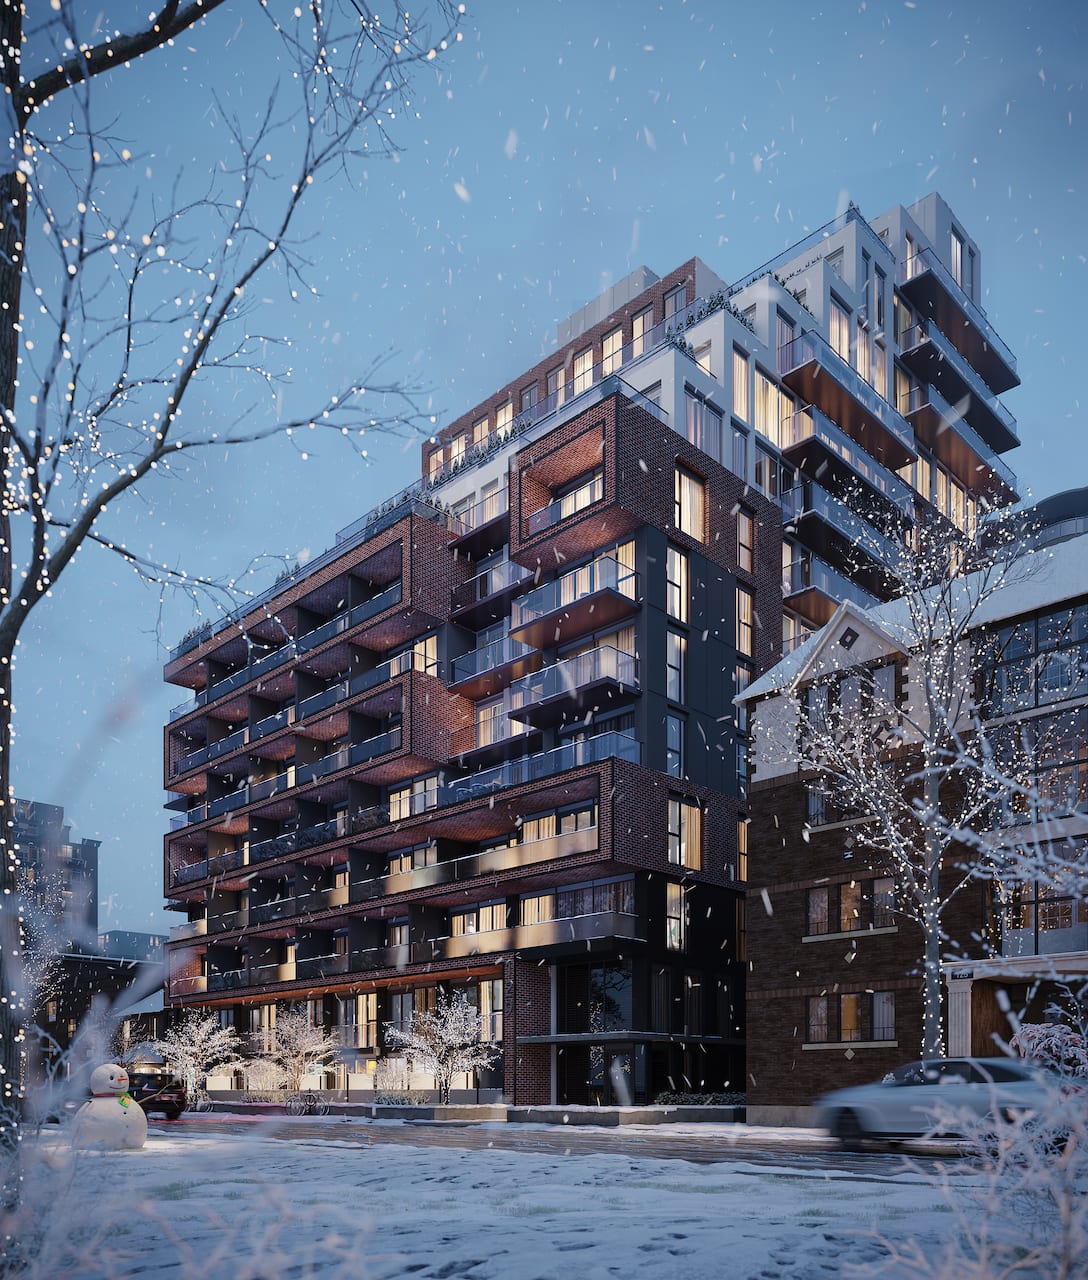 Rendering of Groove Urban Condos exterior in the snowy winter at night